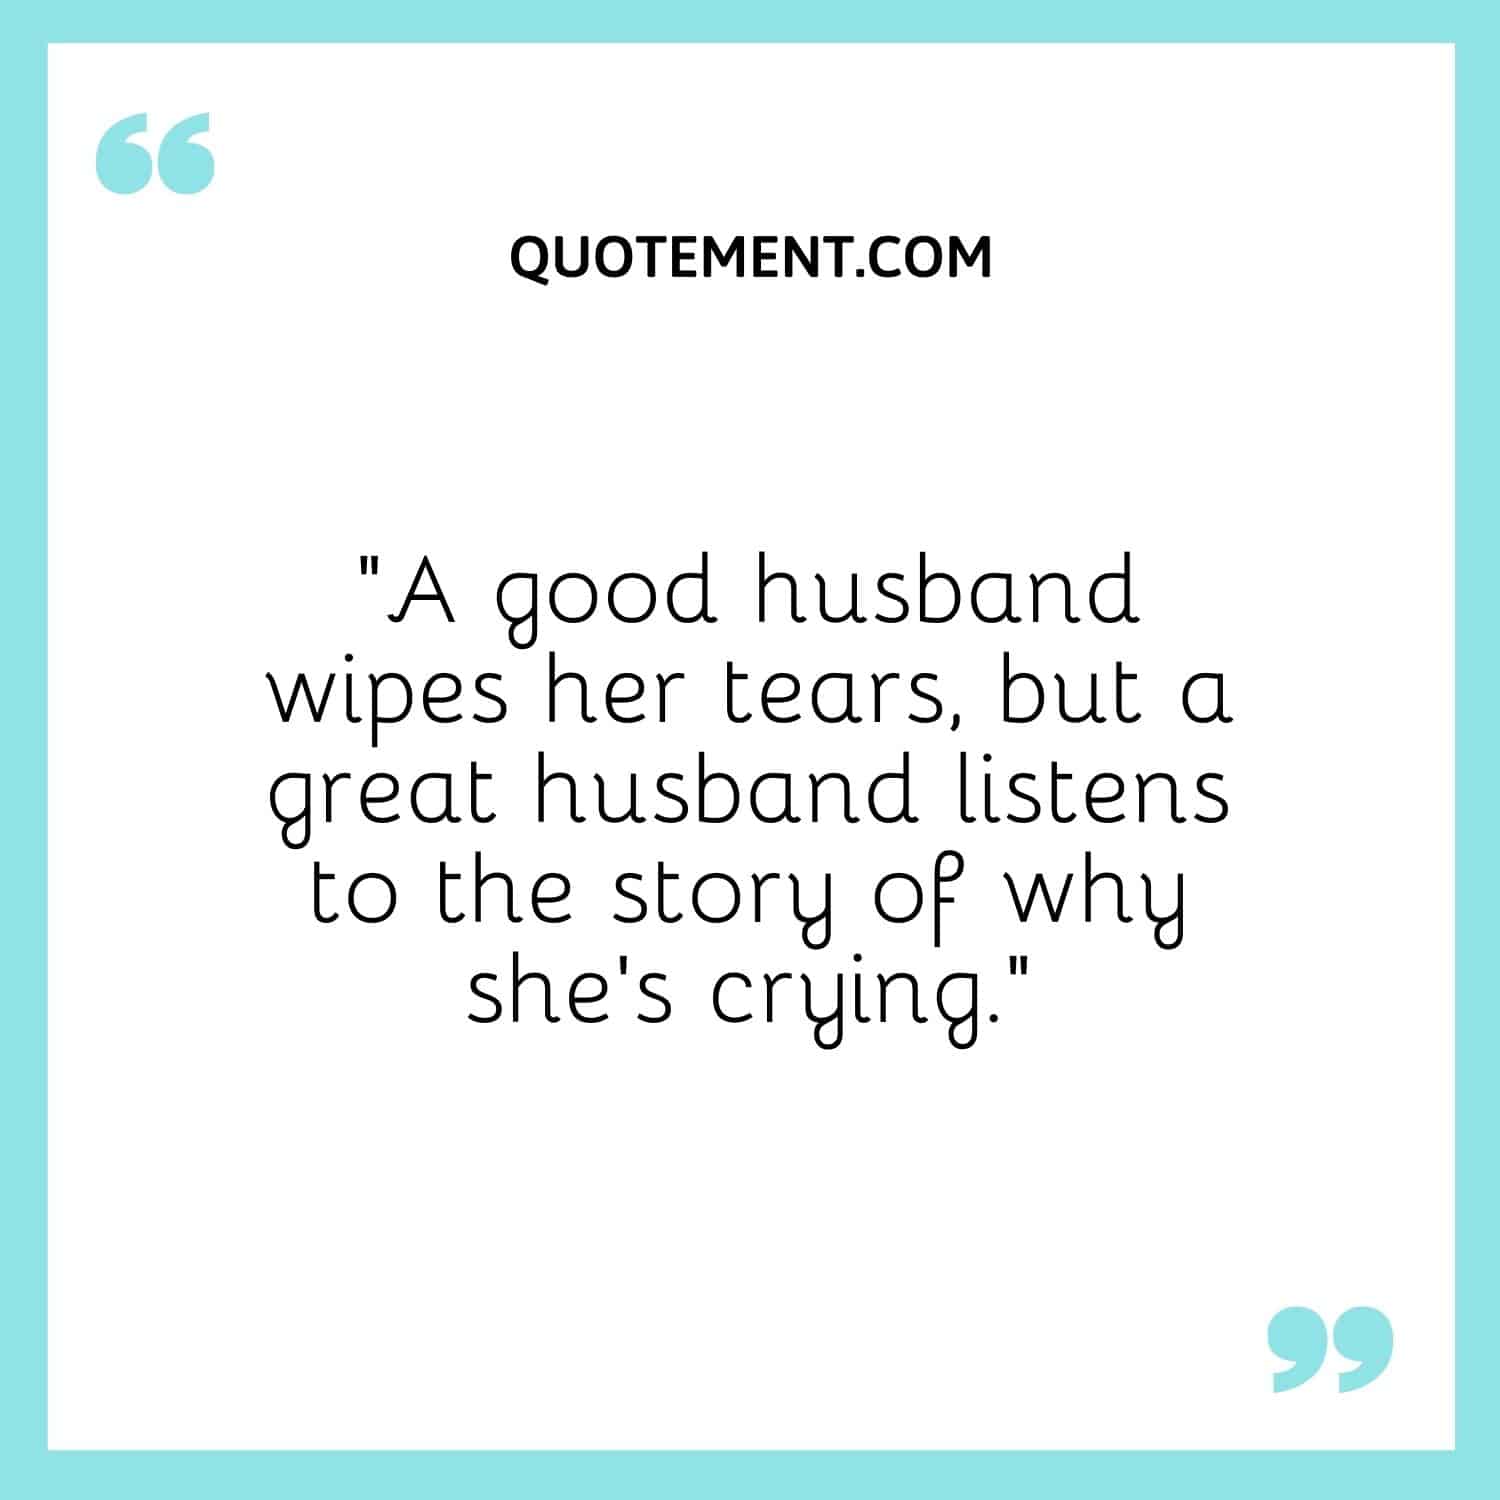 “A good husband wipes her tears, but a great husband listens to the story of why she’s crying.”